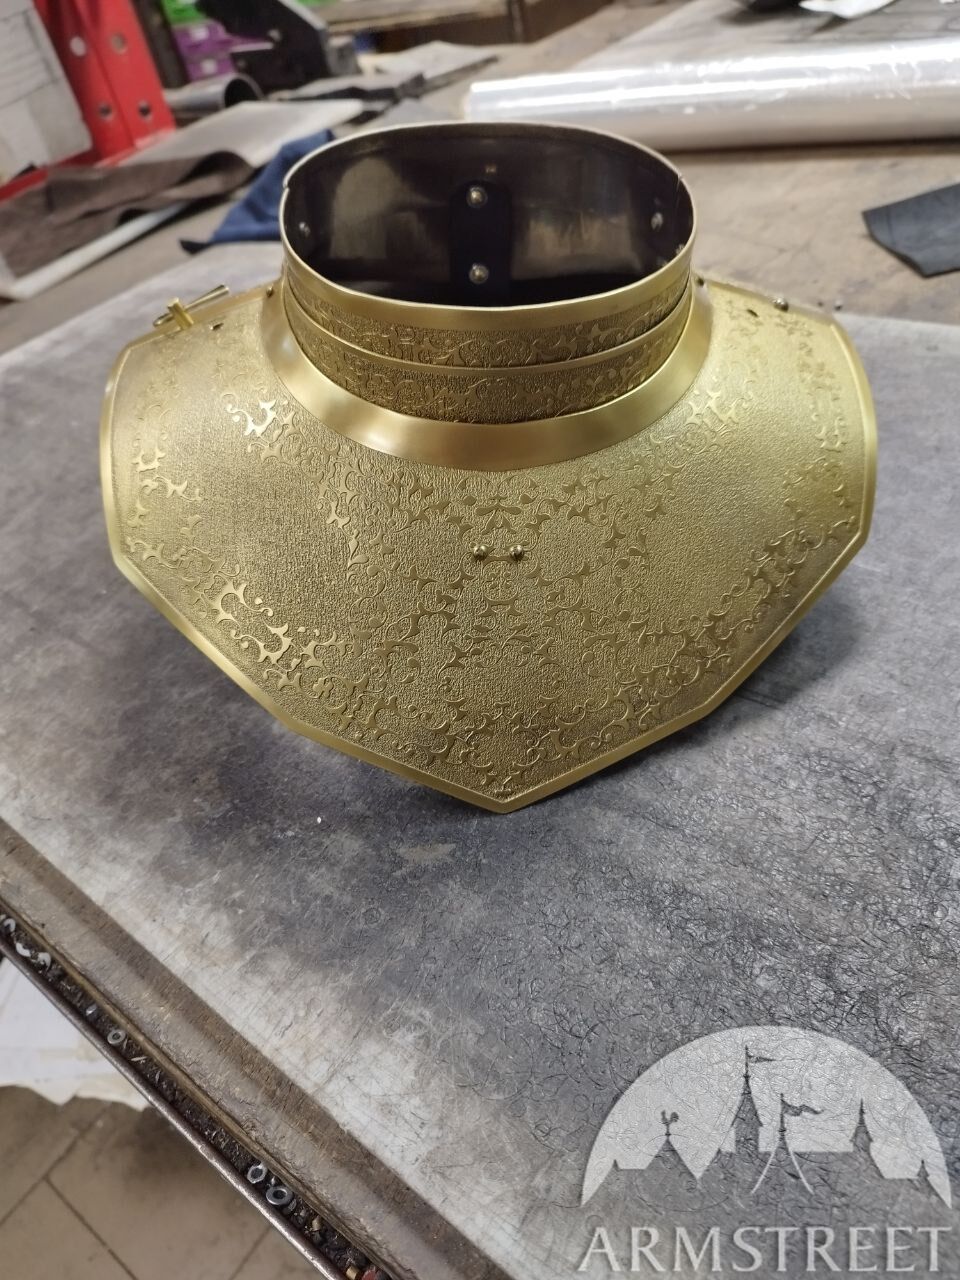 Etched stainless steel armor with a golden finish